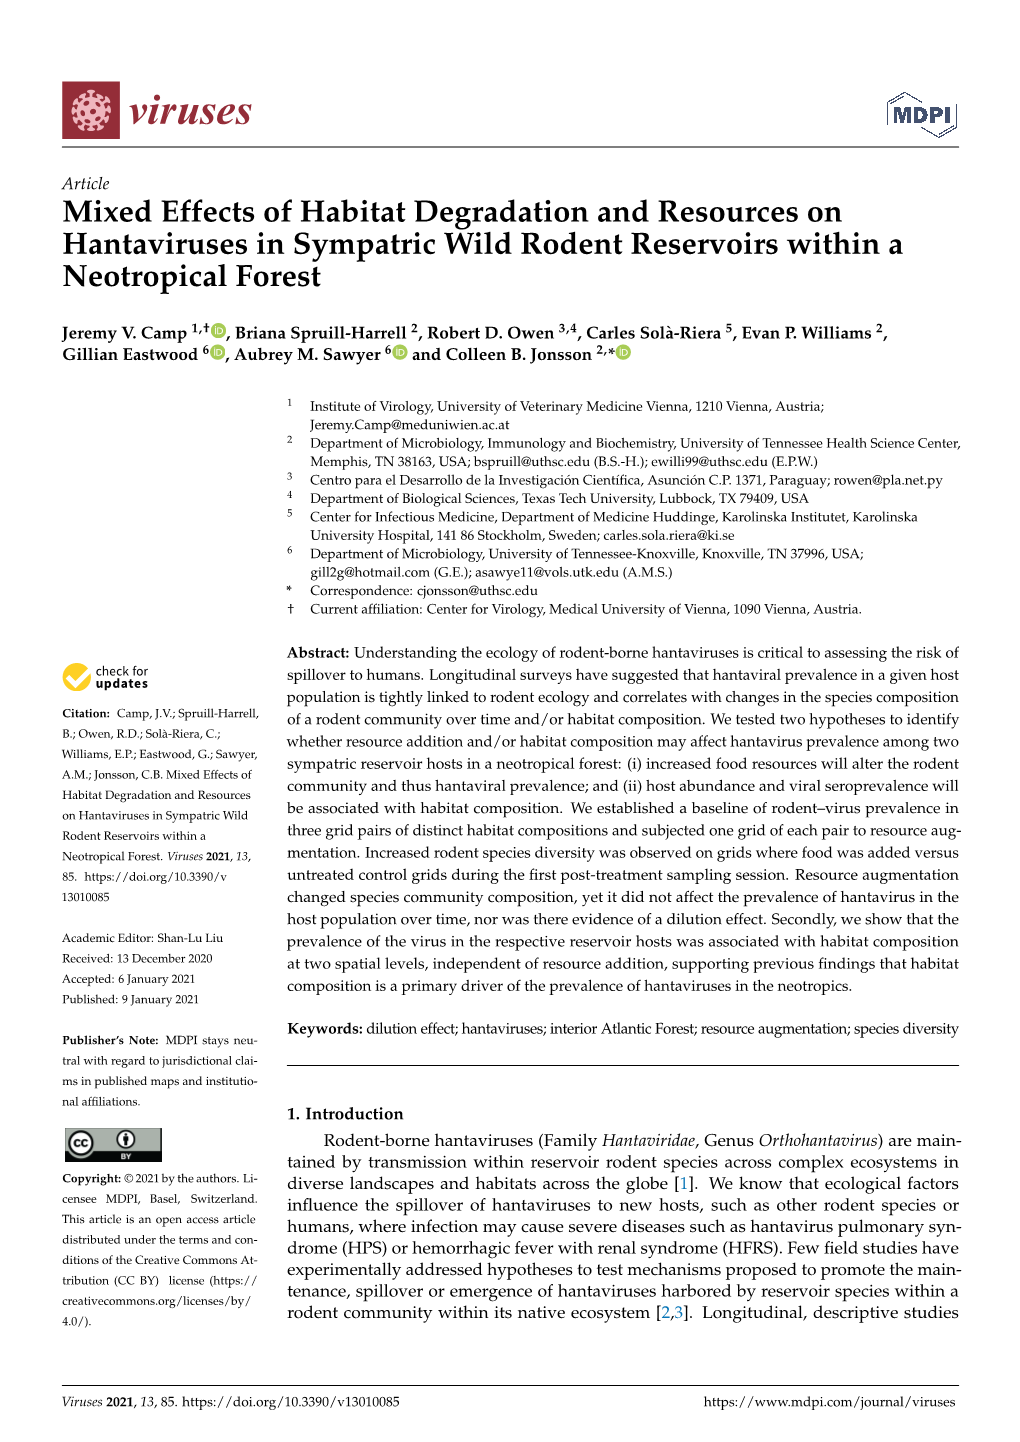 Mixed Effects of Habitat Degradation and Resources on Hantaviruses in Sympatric Wild Rodent Reservoirs Within a Neotropical Forest